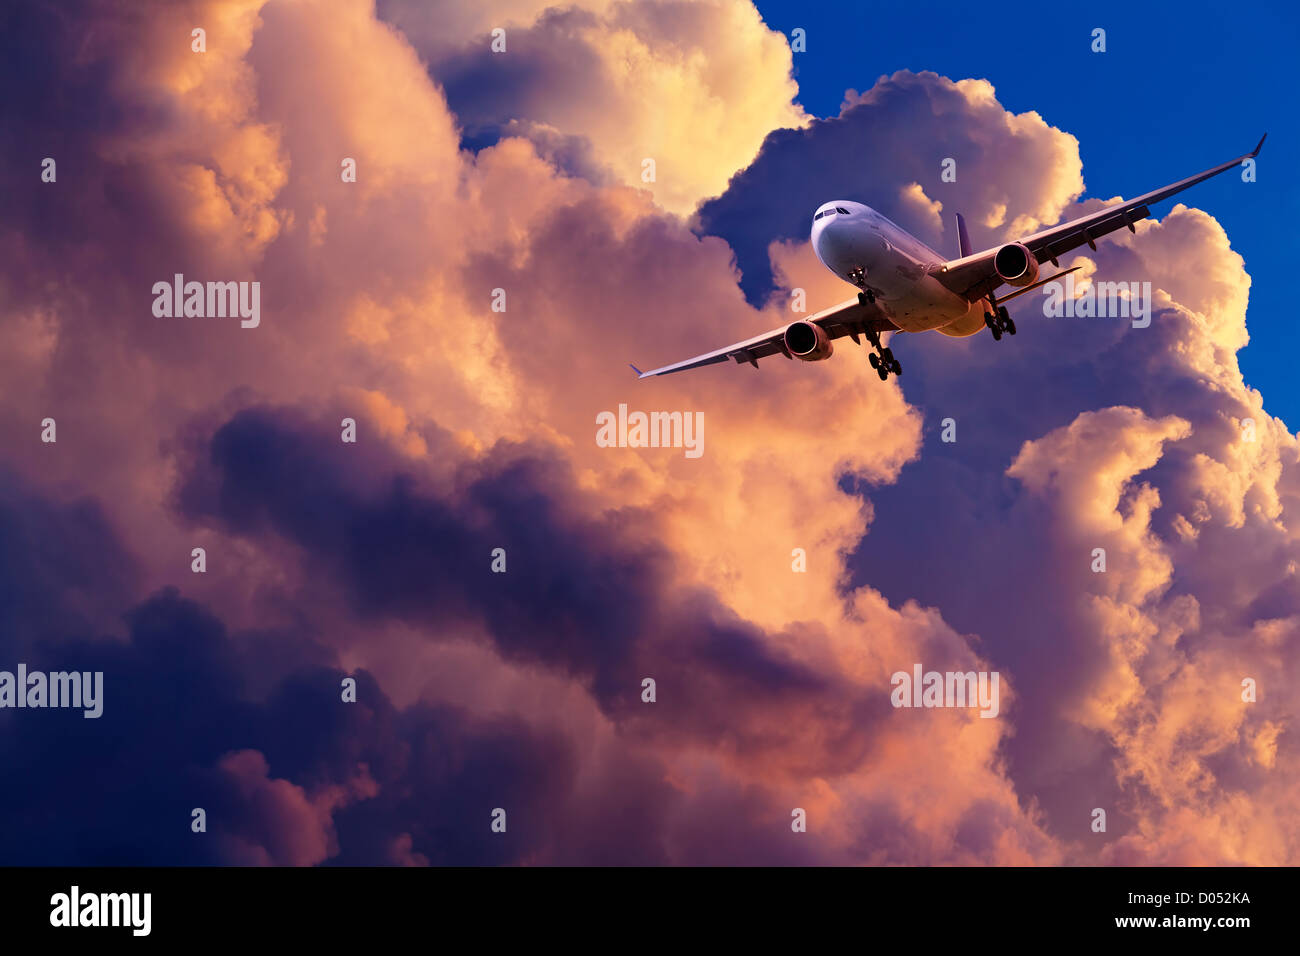 Jet plane is maneuvering for landing in a spectacular sunset sky Stock Photo